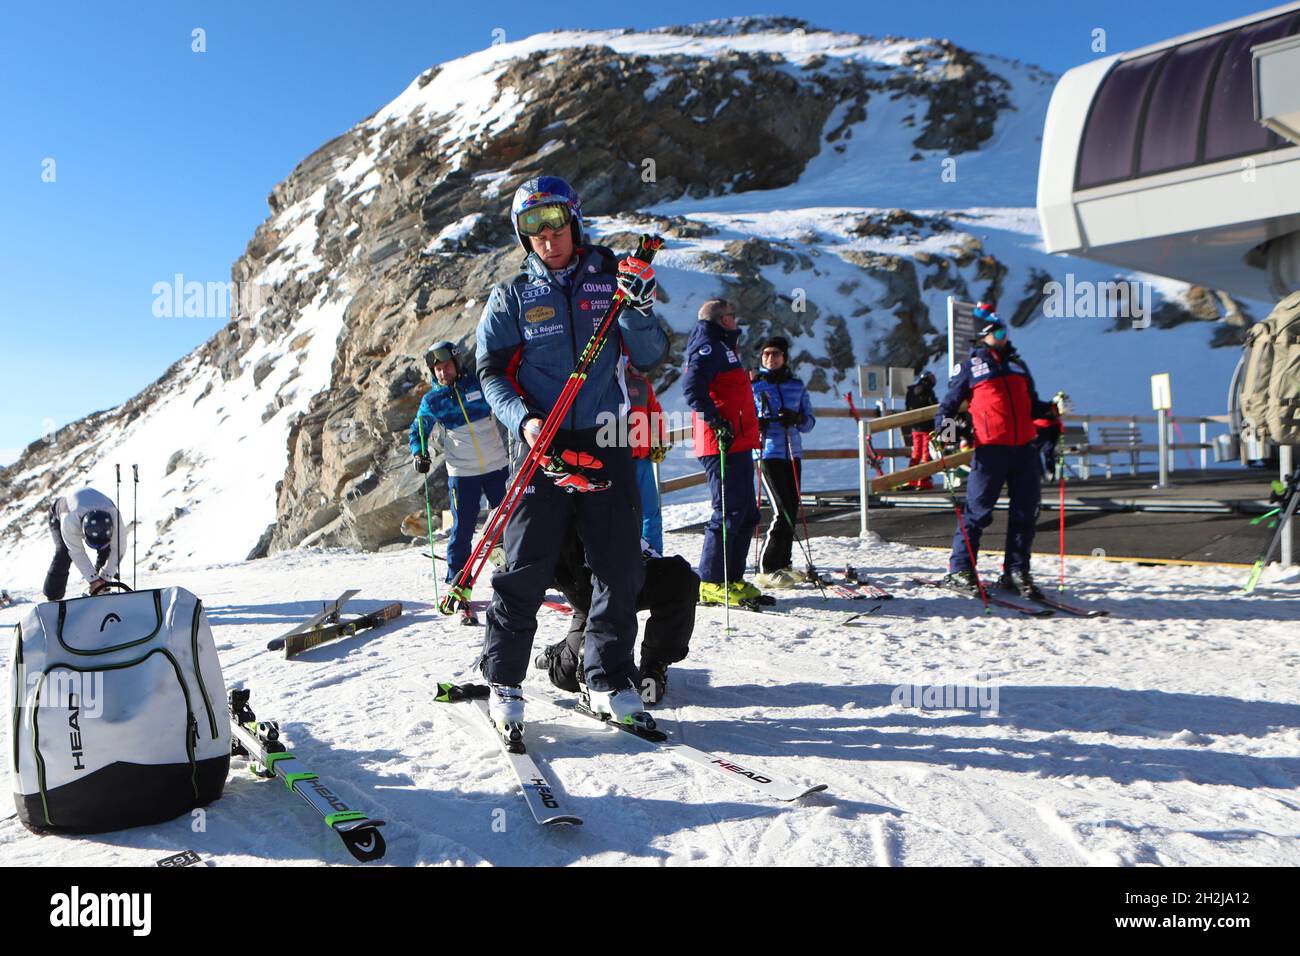 Solden, Austria. 22nd Oct, 2021. Alpine Ski World Cup 2021-2022 - French alpine skier and Overall Winner Alexis Pinturault trains before the Giant Slalom opening race as part of the Alpine Ski World Cup in Solden on October 22, 2021; Alexis Pinturault (Photo by Pierre Teyssot/ESPA-Images) Credit: European Sports Photo Agency/Alamy Live News Stock Photo